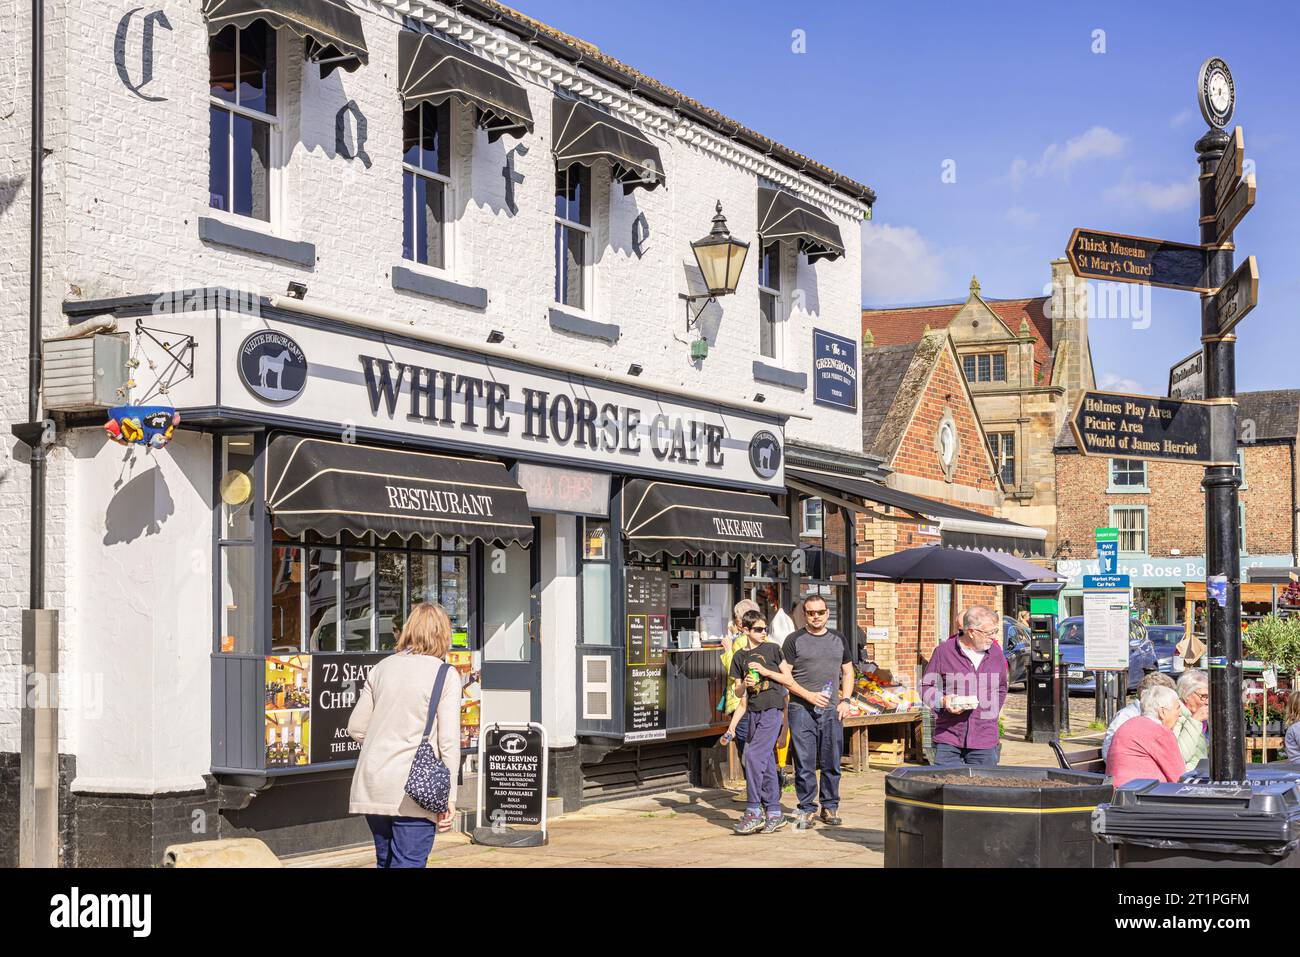 A street scene outside a whitewashed cafe in a market town. There is a signpost in the foreground and clear sky is above. Stock Photo